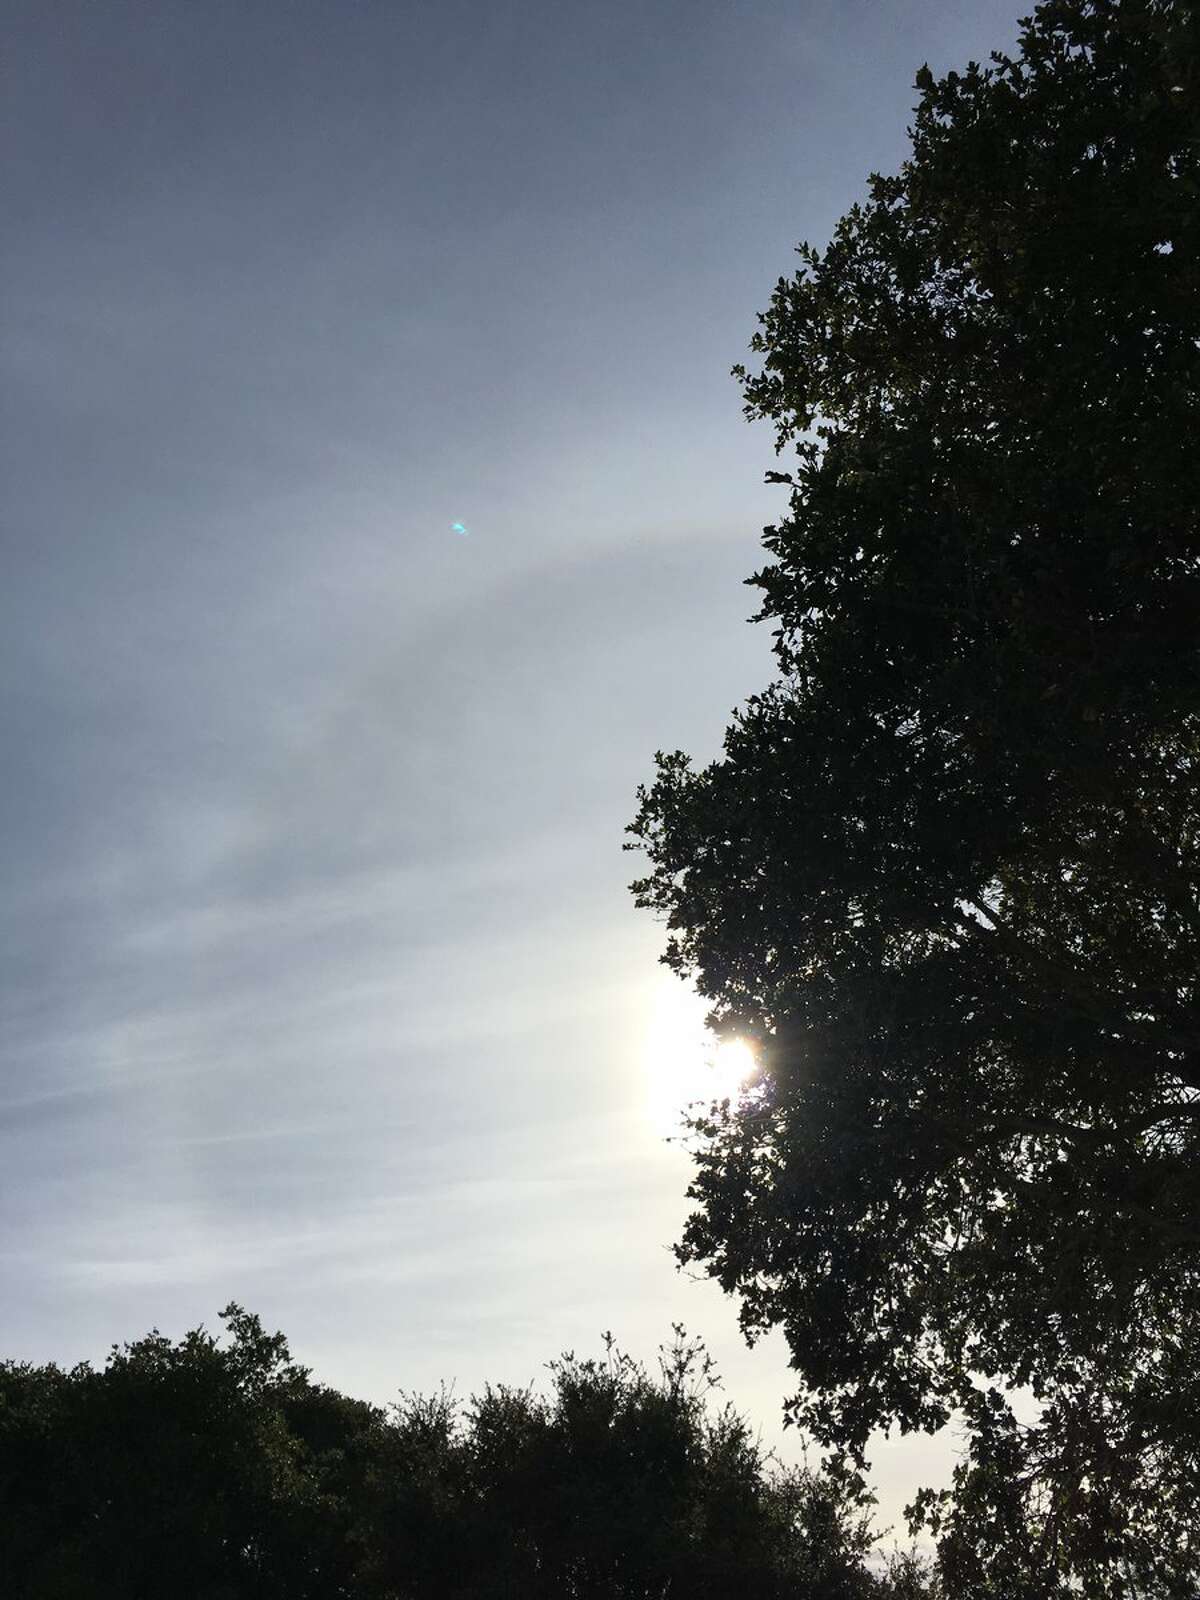 22 degree halo: These rings of light occur around the sun or moon when light is refracted by ice crystals associated with high-level clouds known as cirrostratus.